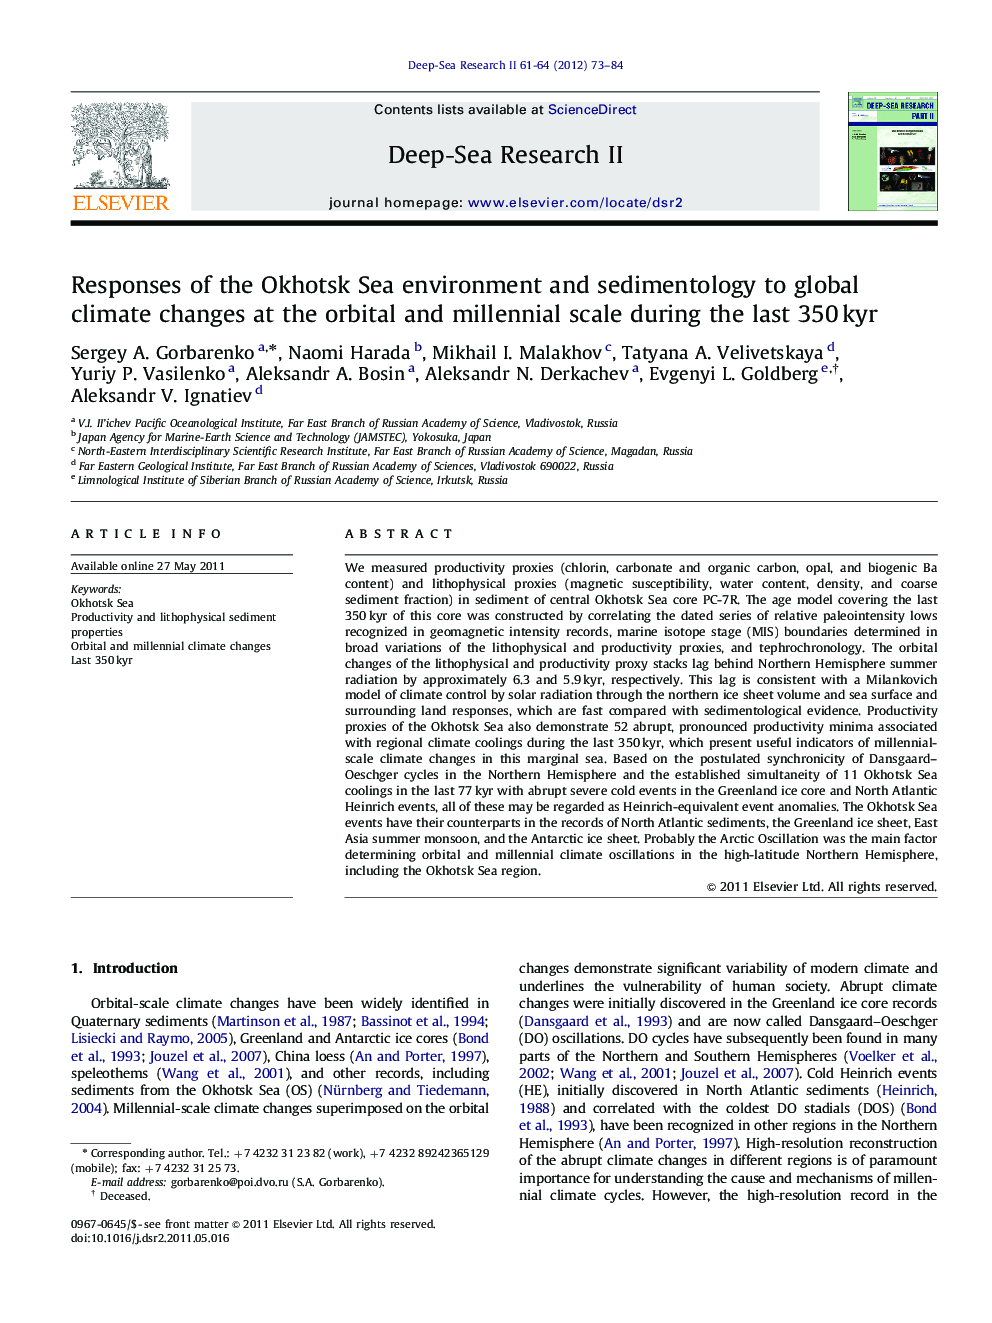 Responses of the Okhotsk Sea environment and sedimentology to global climate changes at the orbital and millennial scale during the last 350 kyr